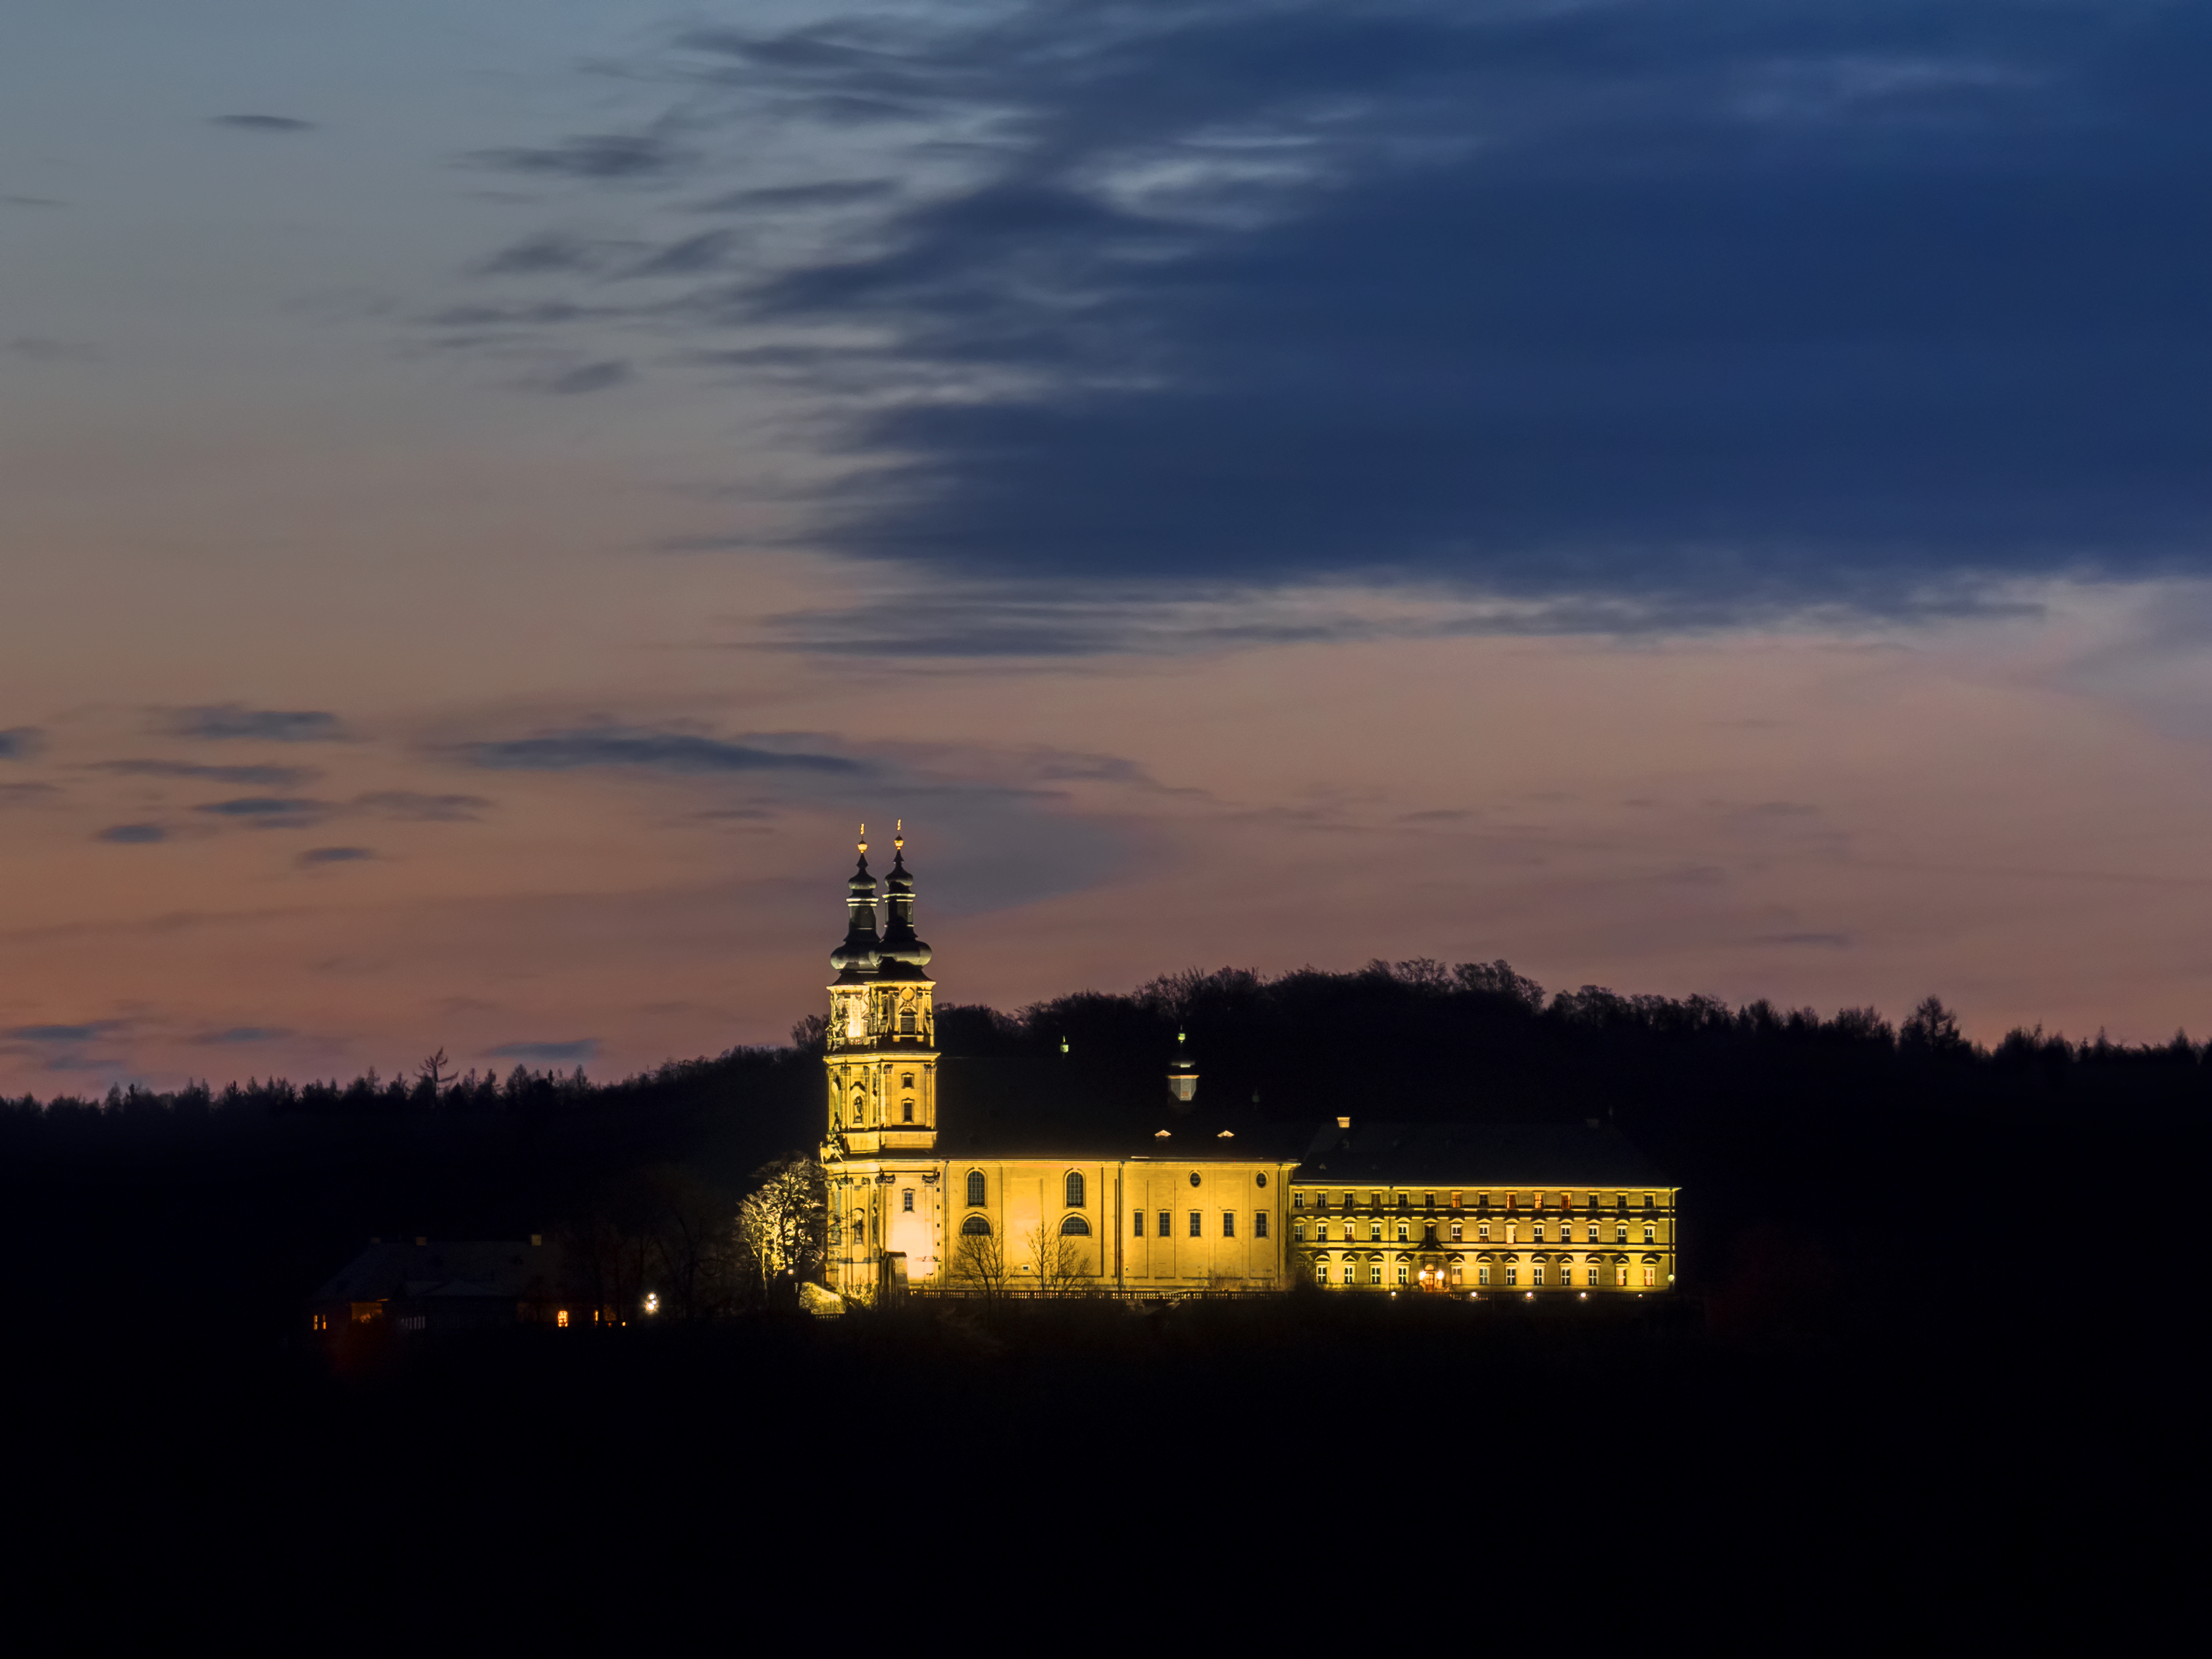 Kloster Banz at night P3RM0940